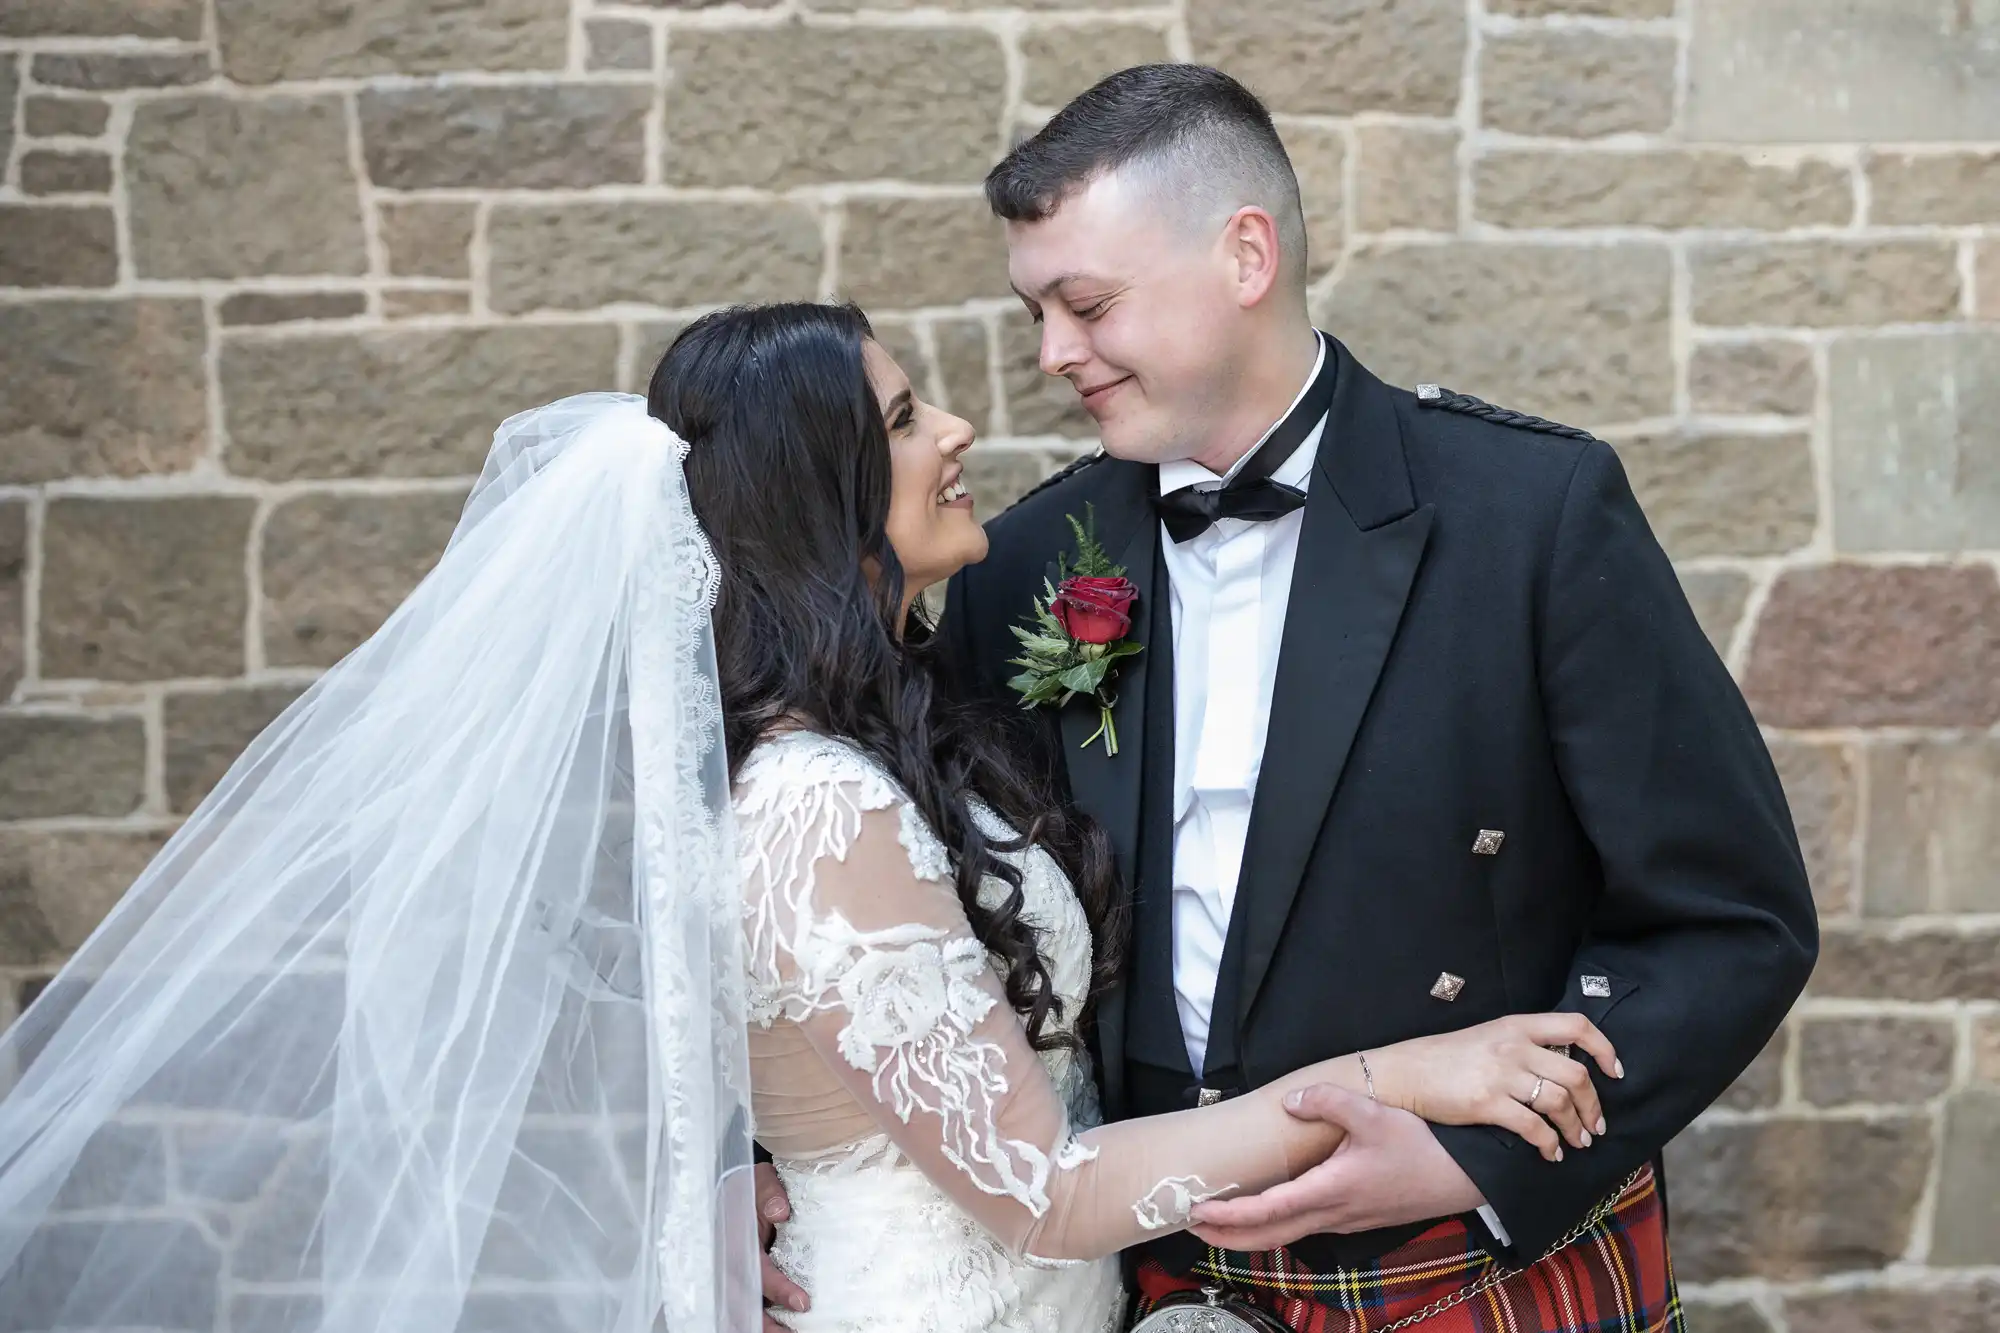 Bride in a white lace gown and groom in a kilt smiling at each other affectionately, standing against a stone wall backdrop.